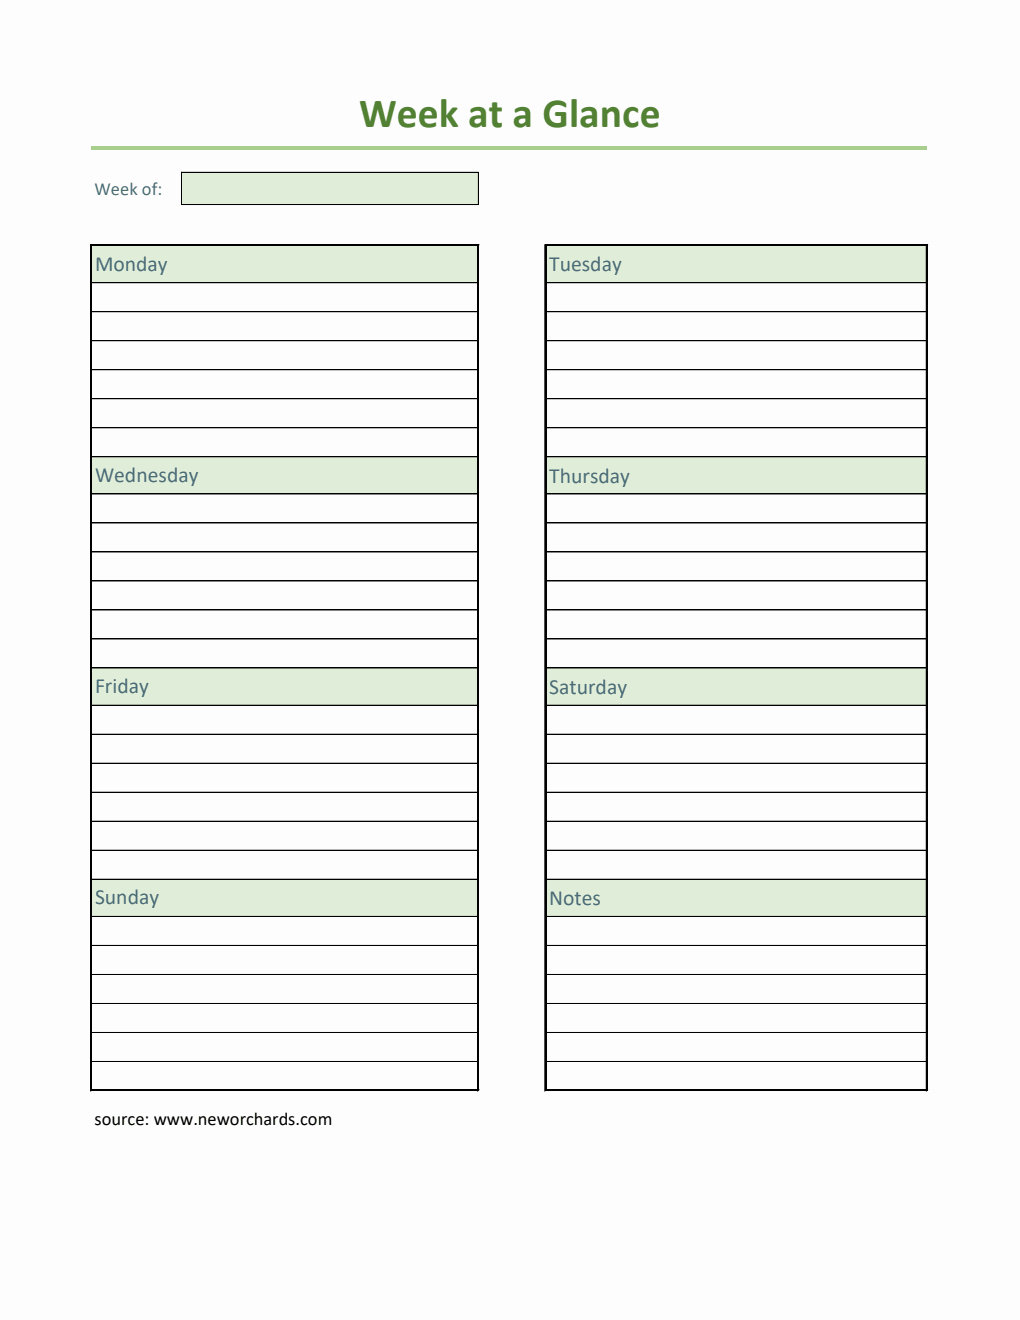  Week at a Glance Template (Excel)